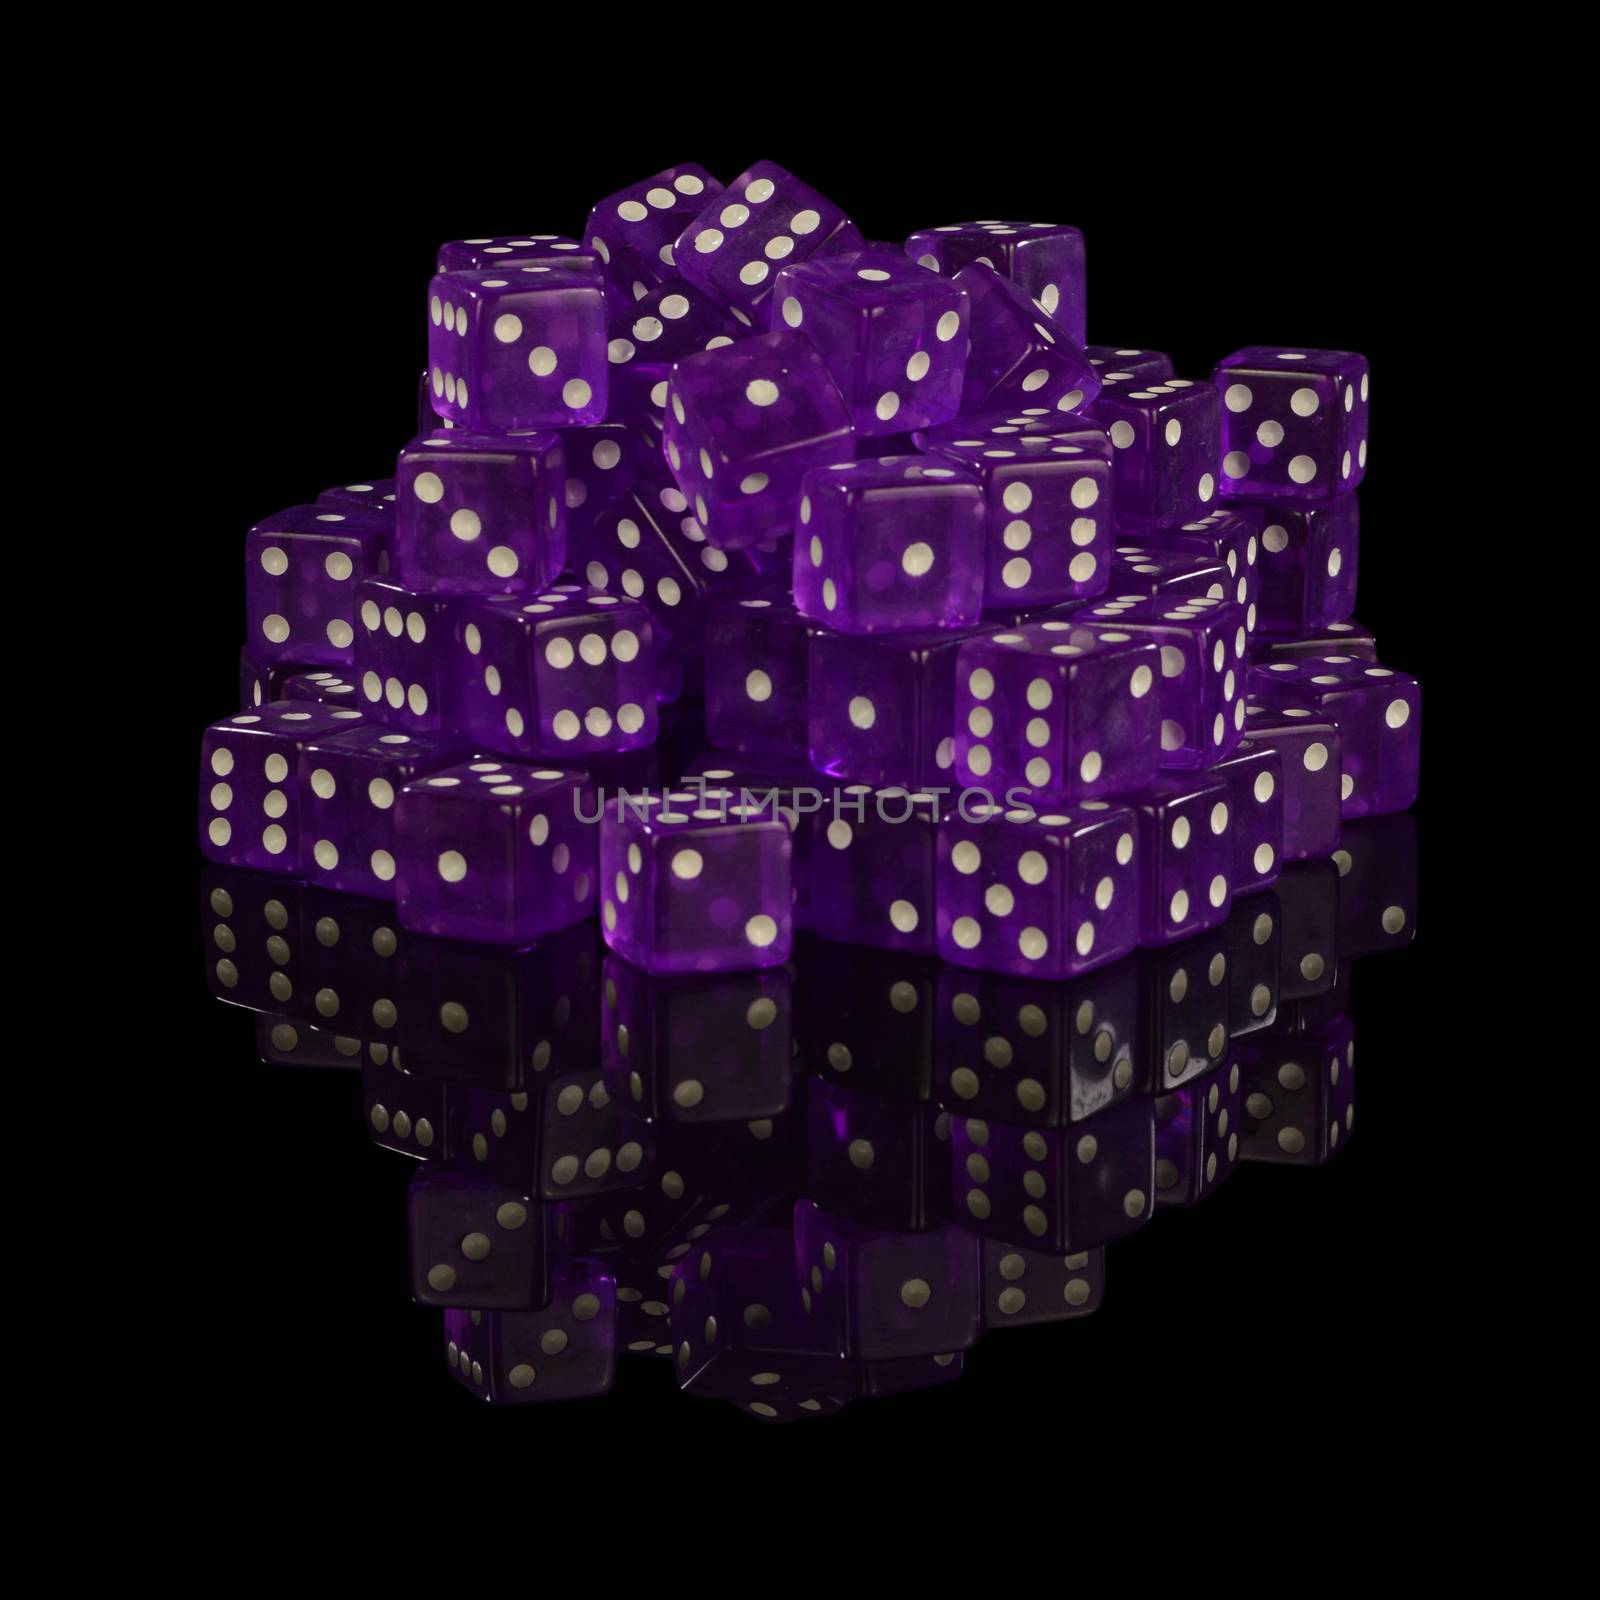 A heaping pile of new unused casino grade dice with a black reflective surface background.